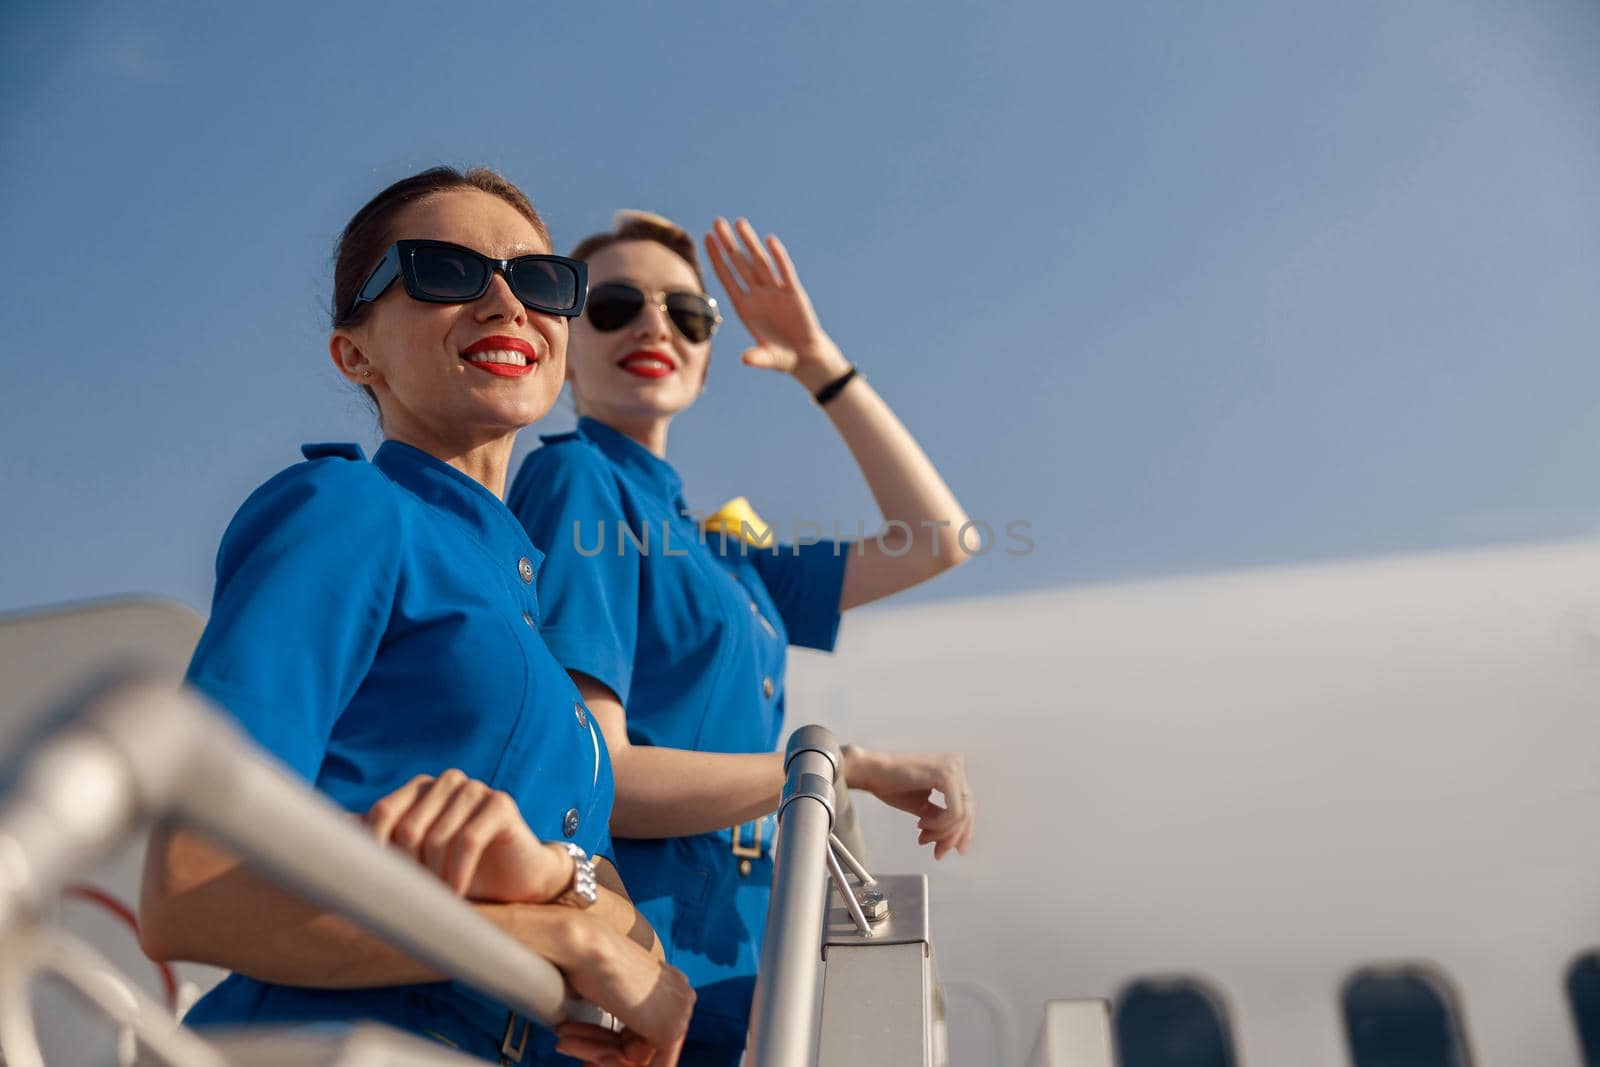 Portrait of two cheerful air stewardesses in blue uniform and sunglasses smiling away, standing together on airstair on a sunny day by Yaroslav_astakhov